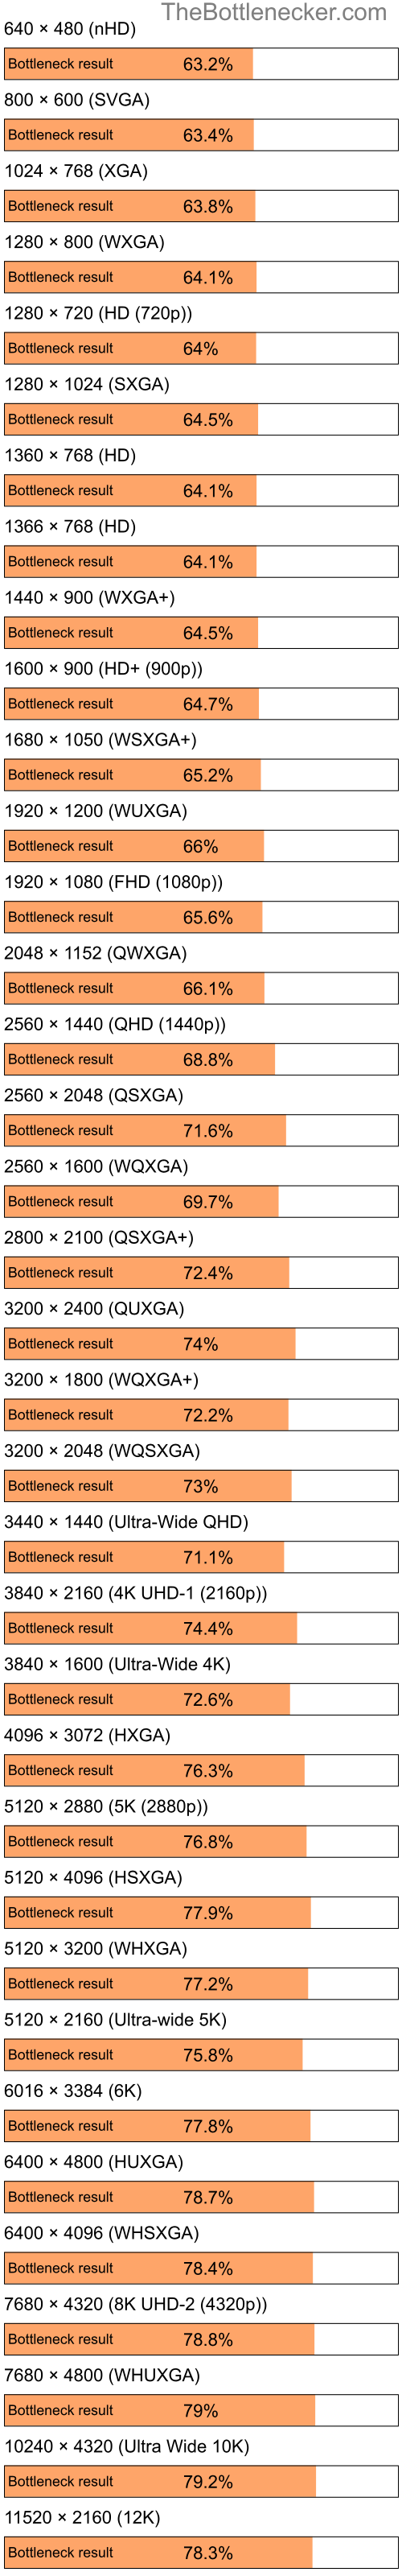 Bottleneck results by resolution for Intel Atom Z520 and AMD Mobility Radeon HD 4200 in General Tasks